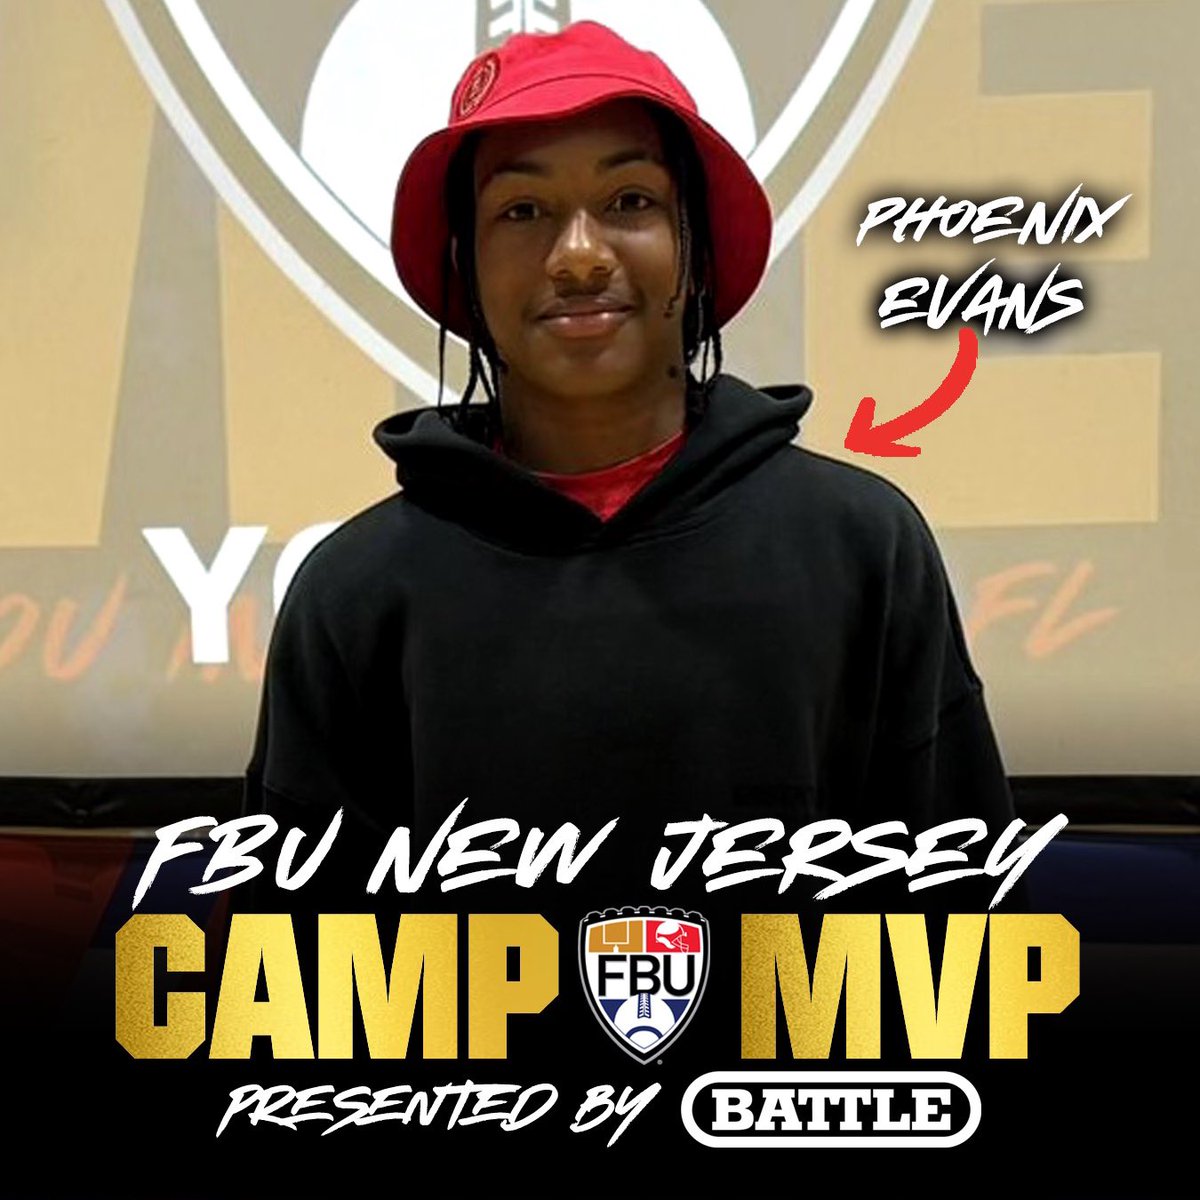 MVP STATUS ✅ Congratulations to Phoenix Evans on being named the Middle School Battle Sports Camp MVP at FBU New Jersey 👏👏 See you in Paradise 🌴🏈 #PathToNaples #ParadiseCoast #FBU #GetBetterHere